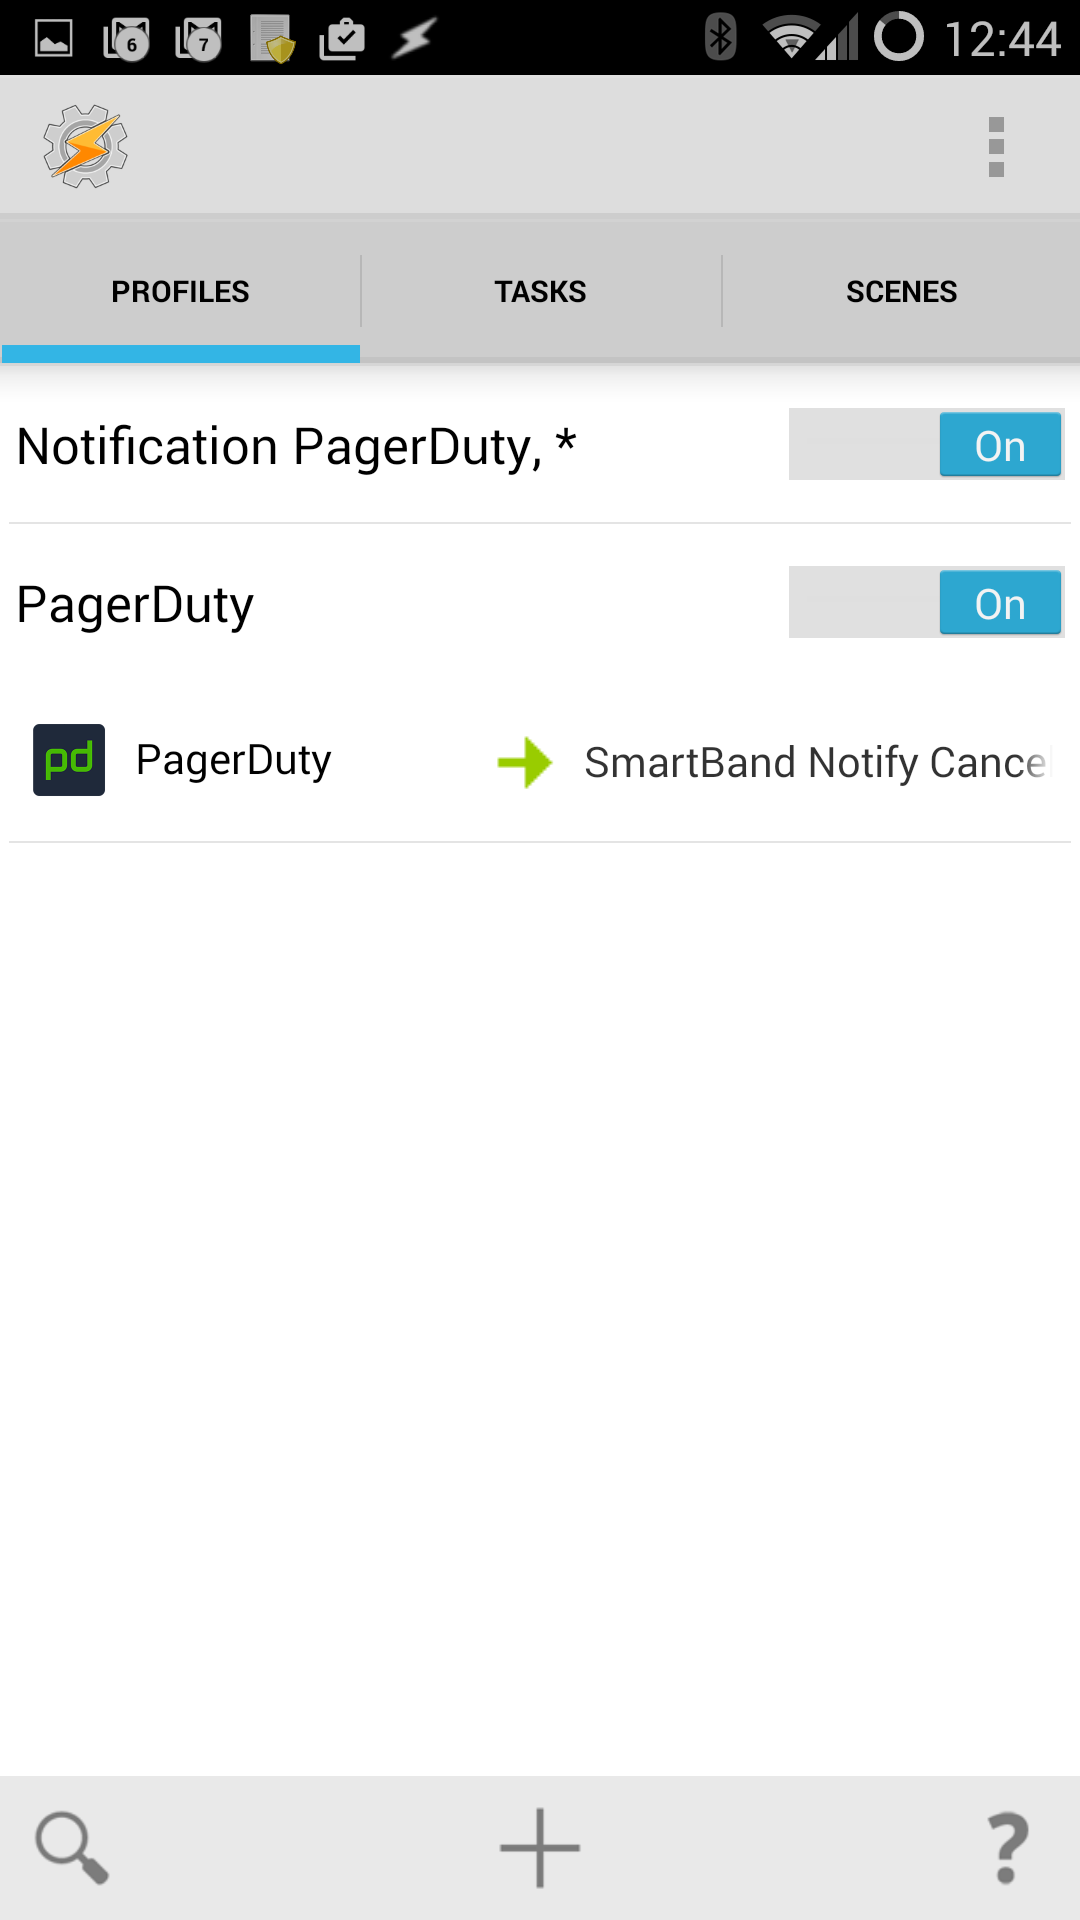 Stop buzzing the smartband when I open the pagerduty app